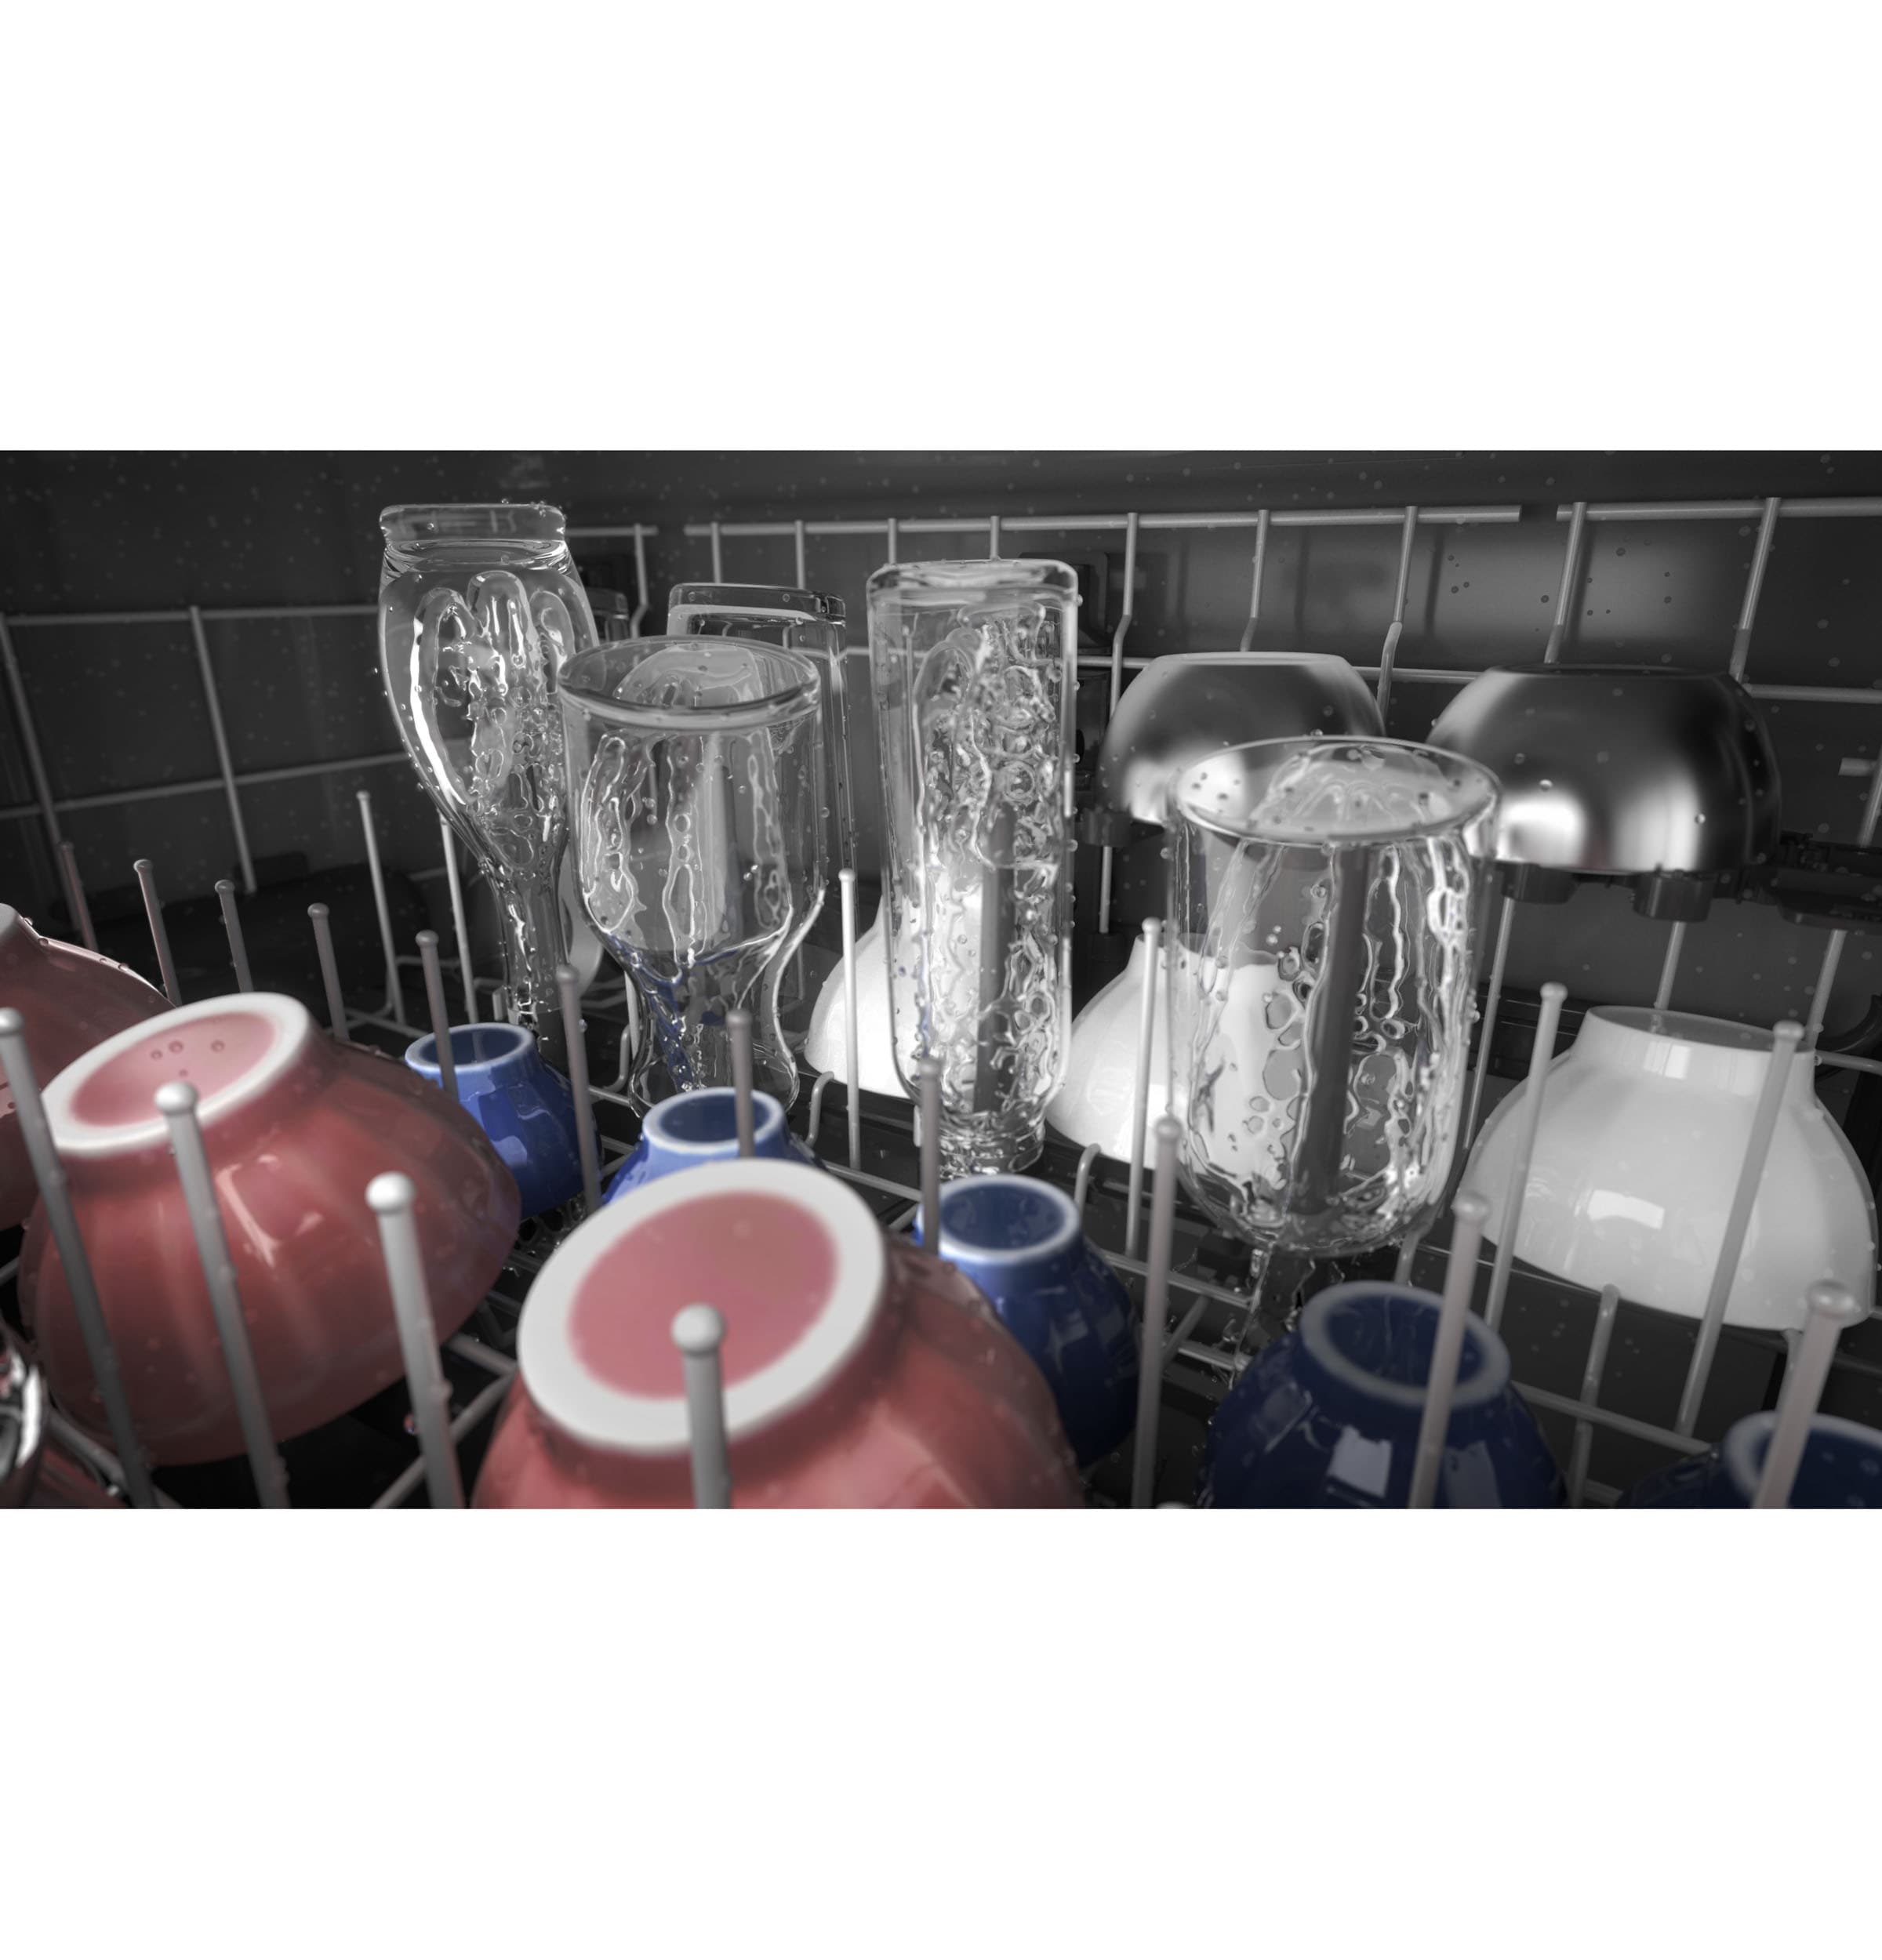 What Are Bottle Jets in a Dishwasher?